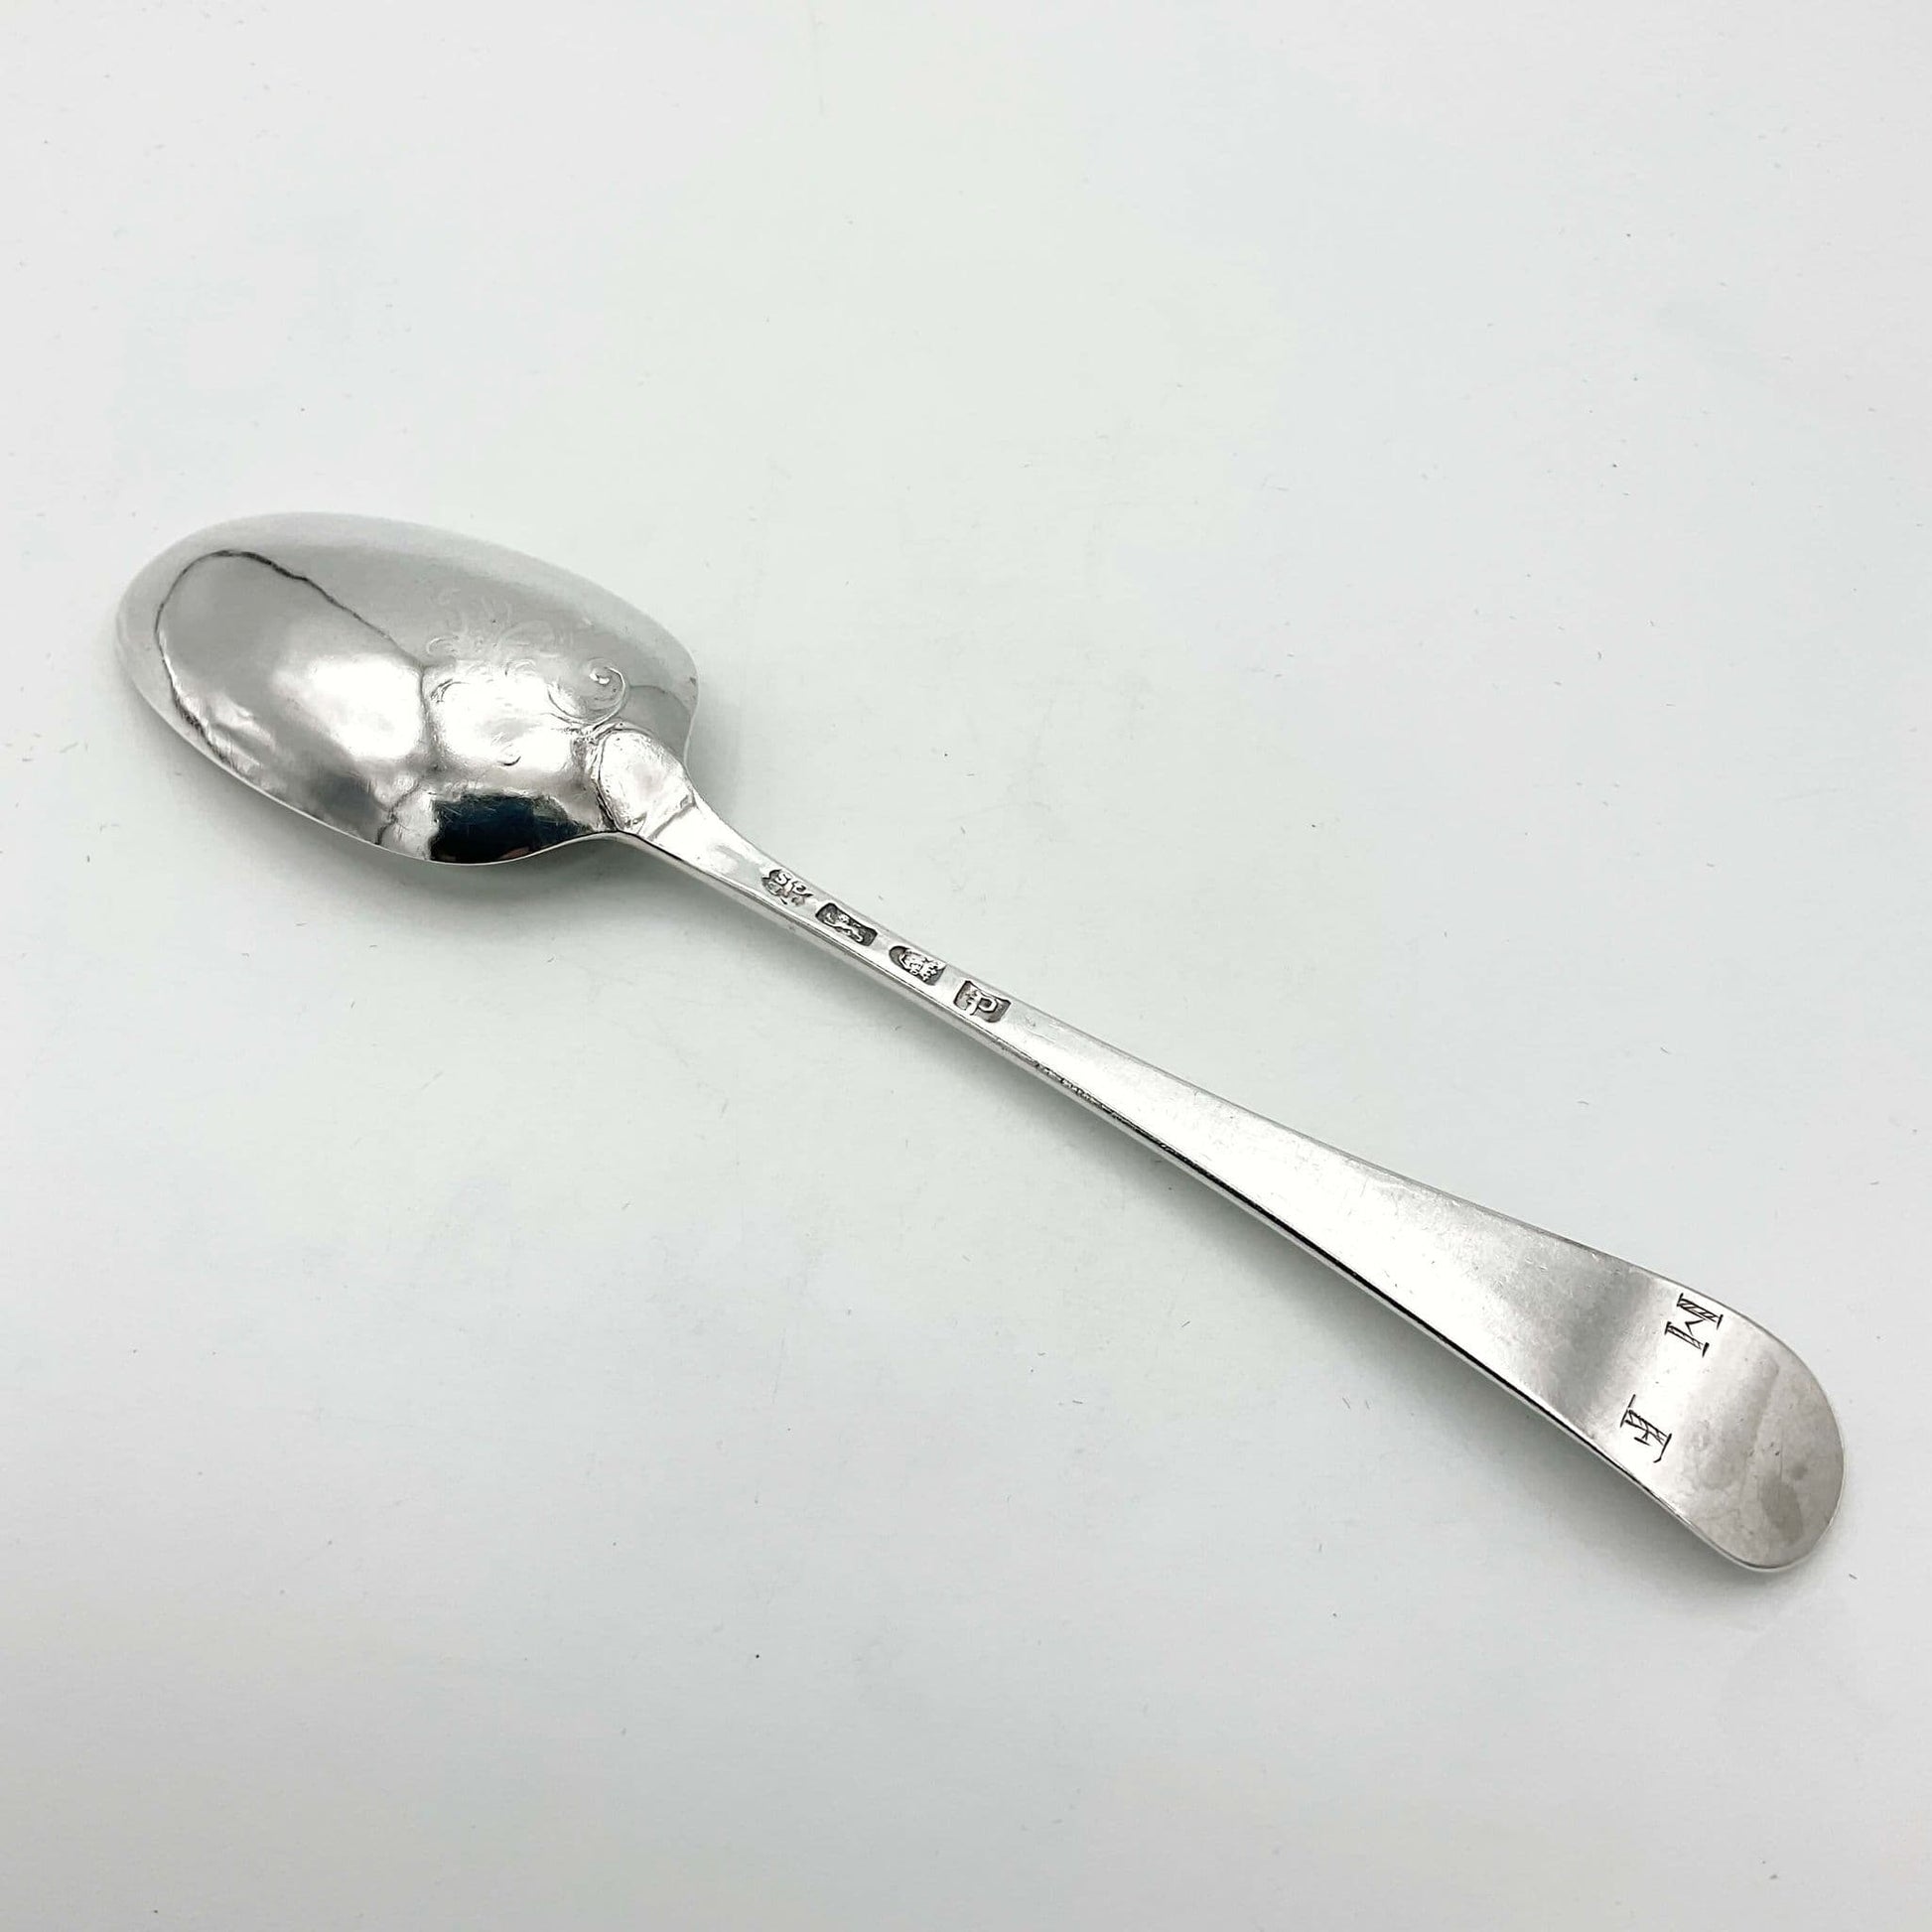 back view of antique silver serving spoon showing hallmarks, scroll design and MF at end of spoon